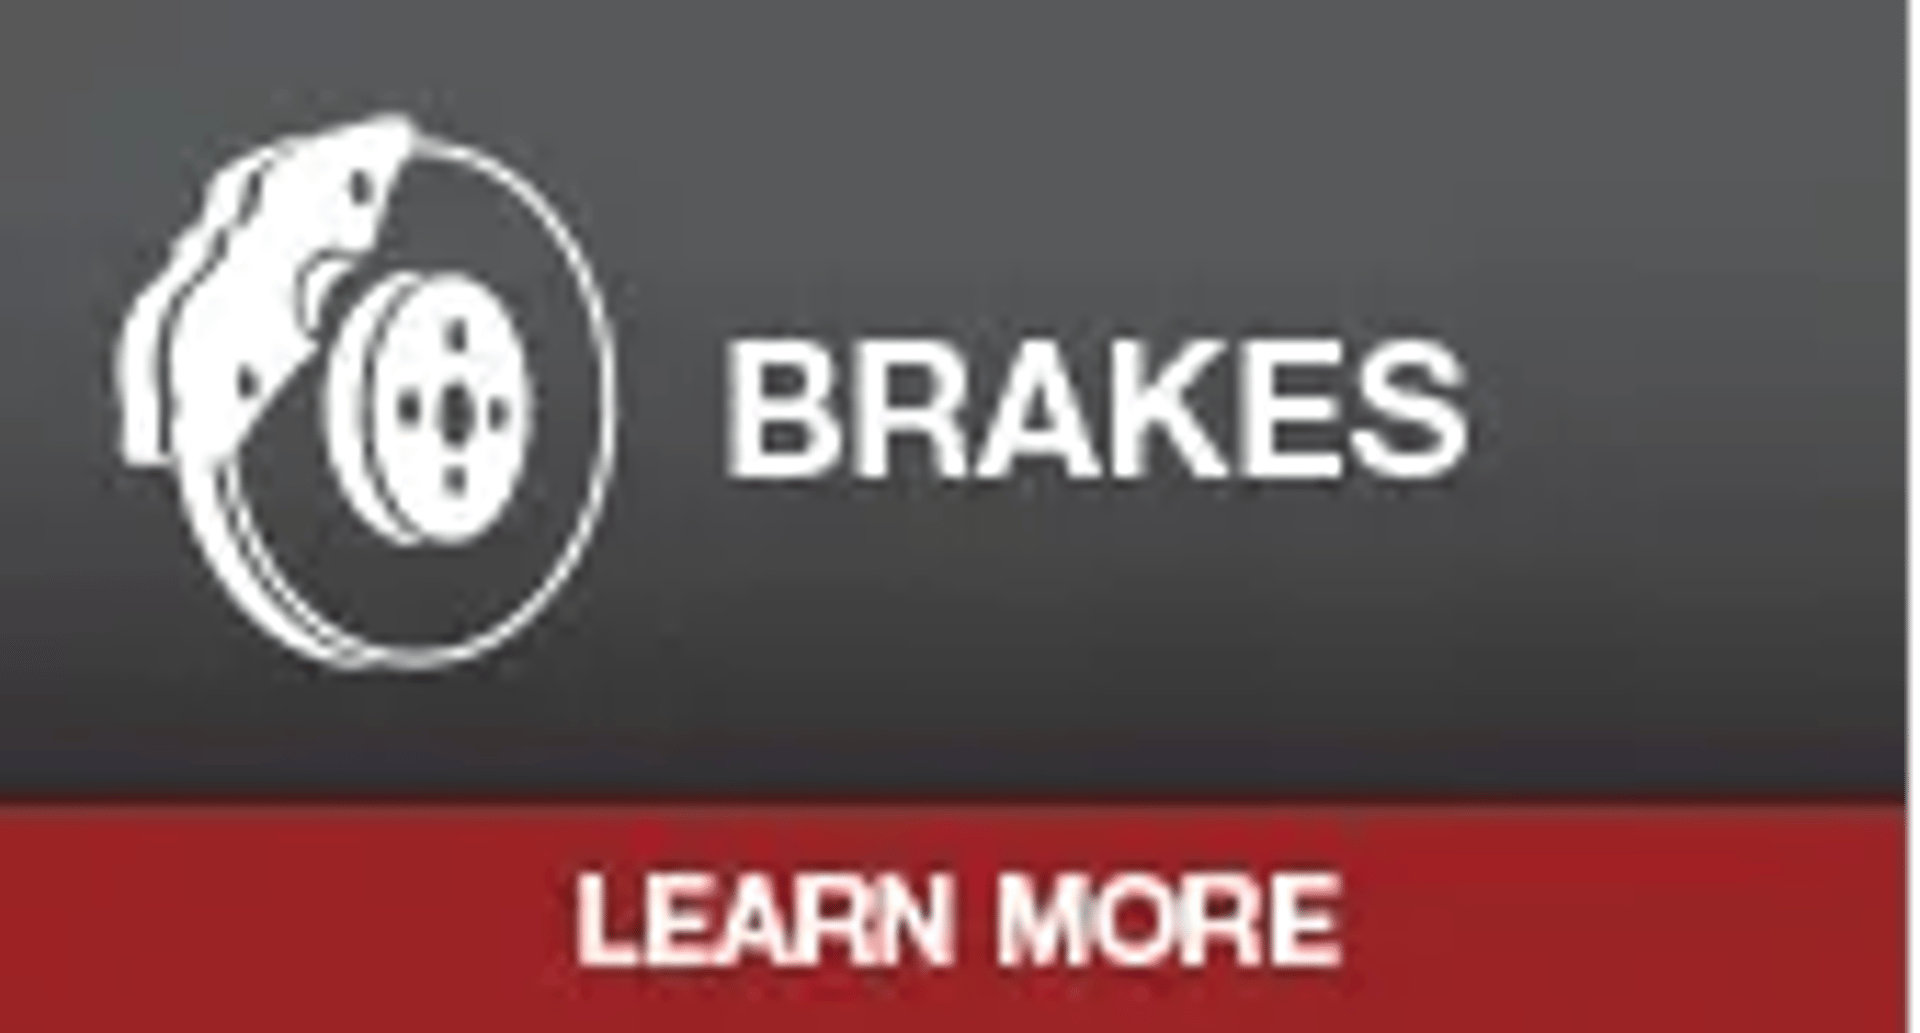 Brakes - Learn More